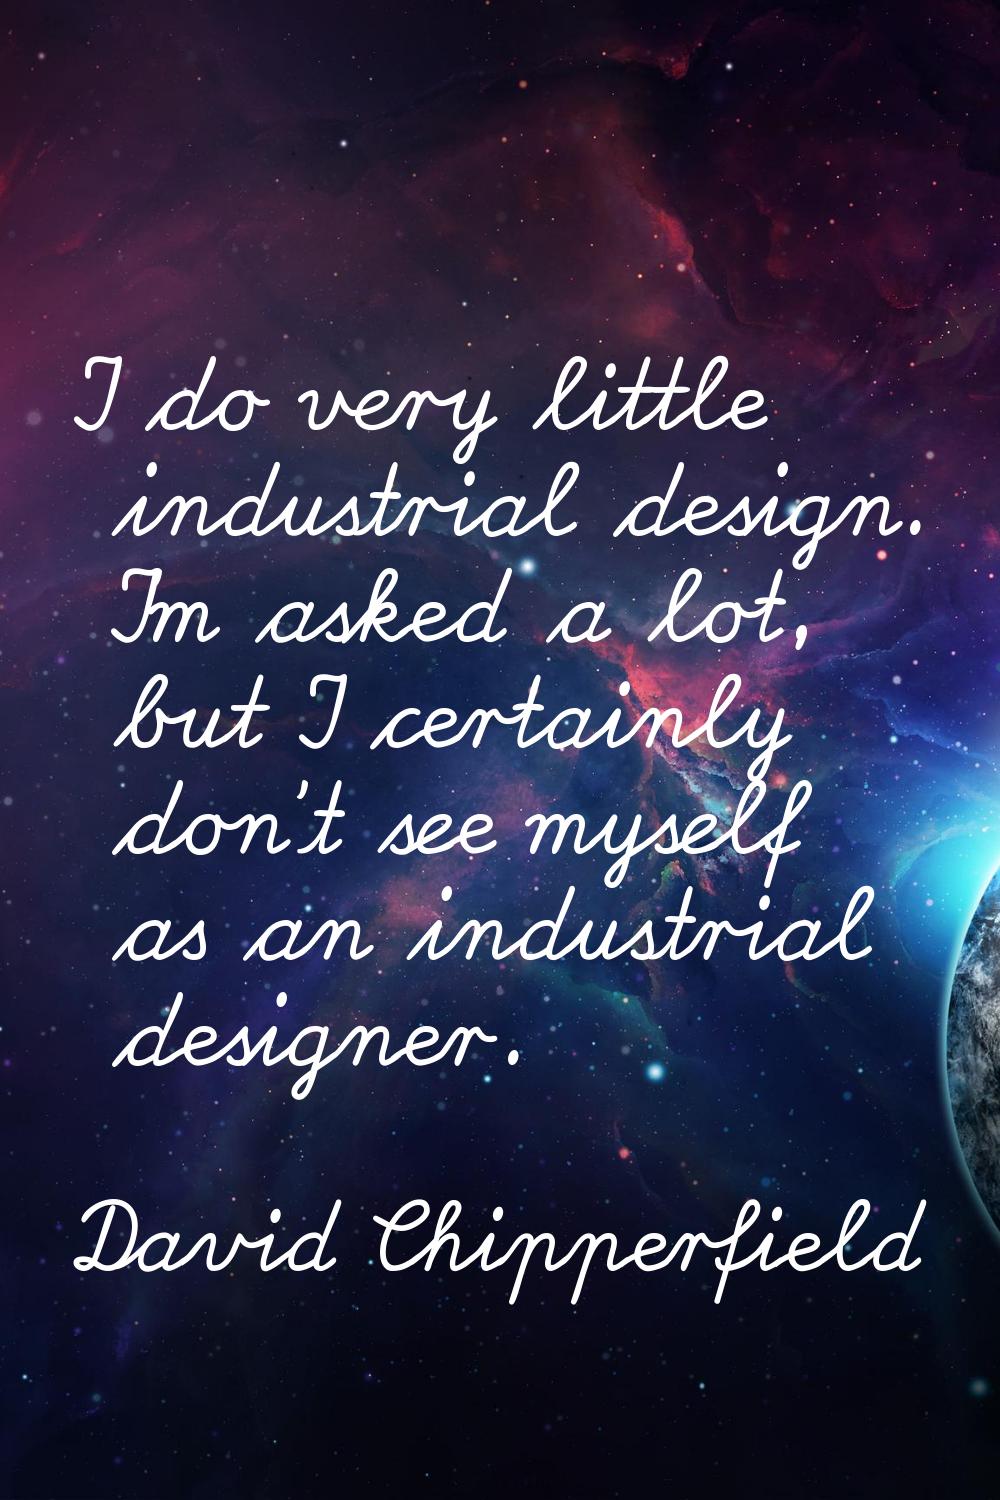 I do very little industrial design. I'm asked a lot, but I certainly don't see myself as an industr